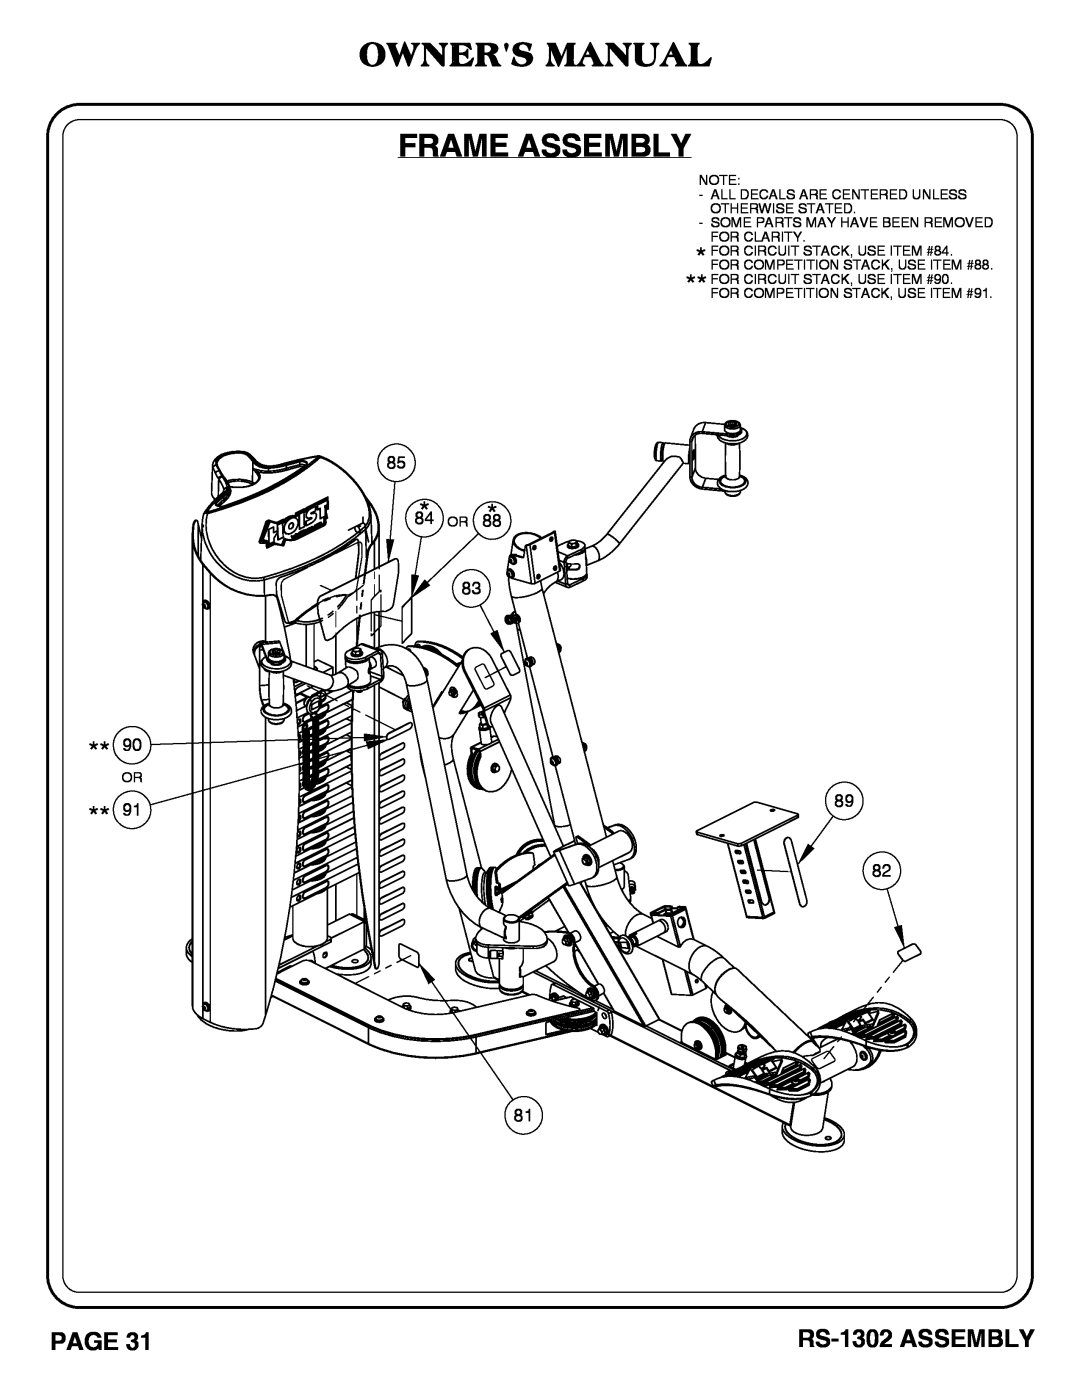 Hoist Fitness Owners Manual Frame Assembly, RS-1302 ASSEMBLY, All Decals Are Centered Unless Otherwise Stated 